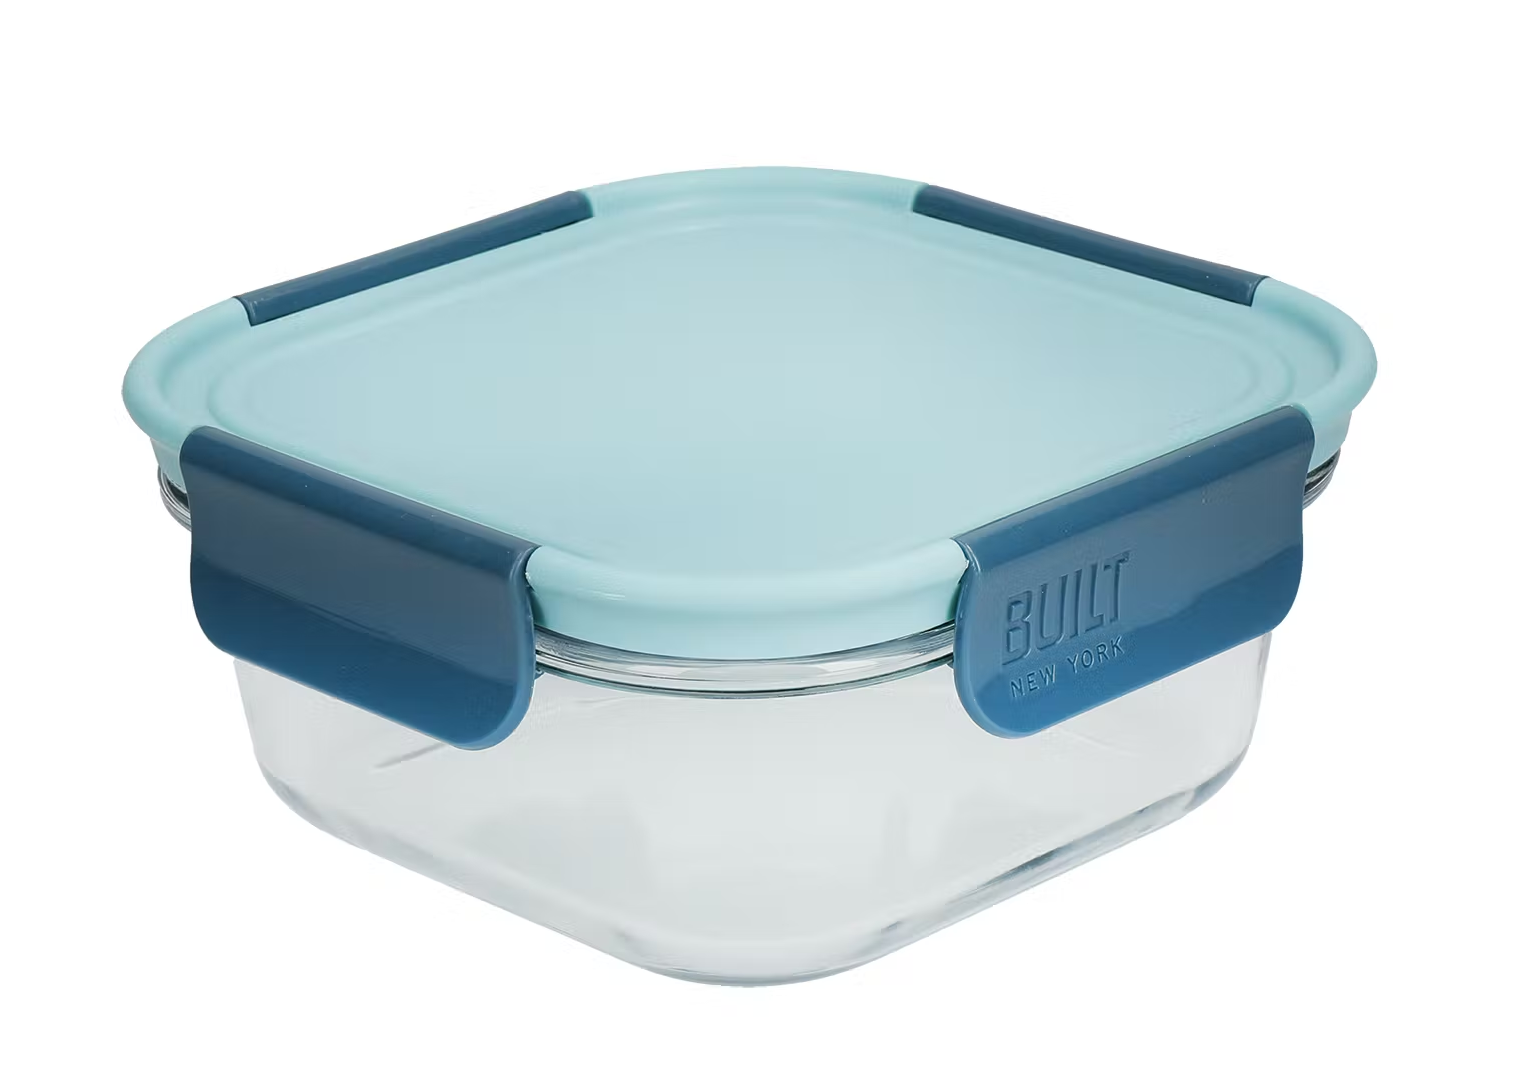 Built Retro Glass 700ml Lunch Box with Clip Seal Plastic Lid